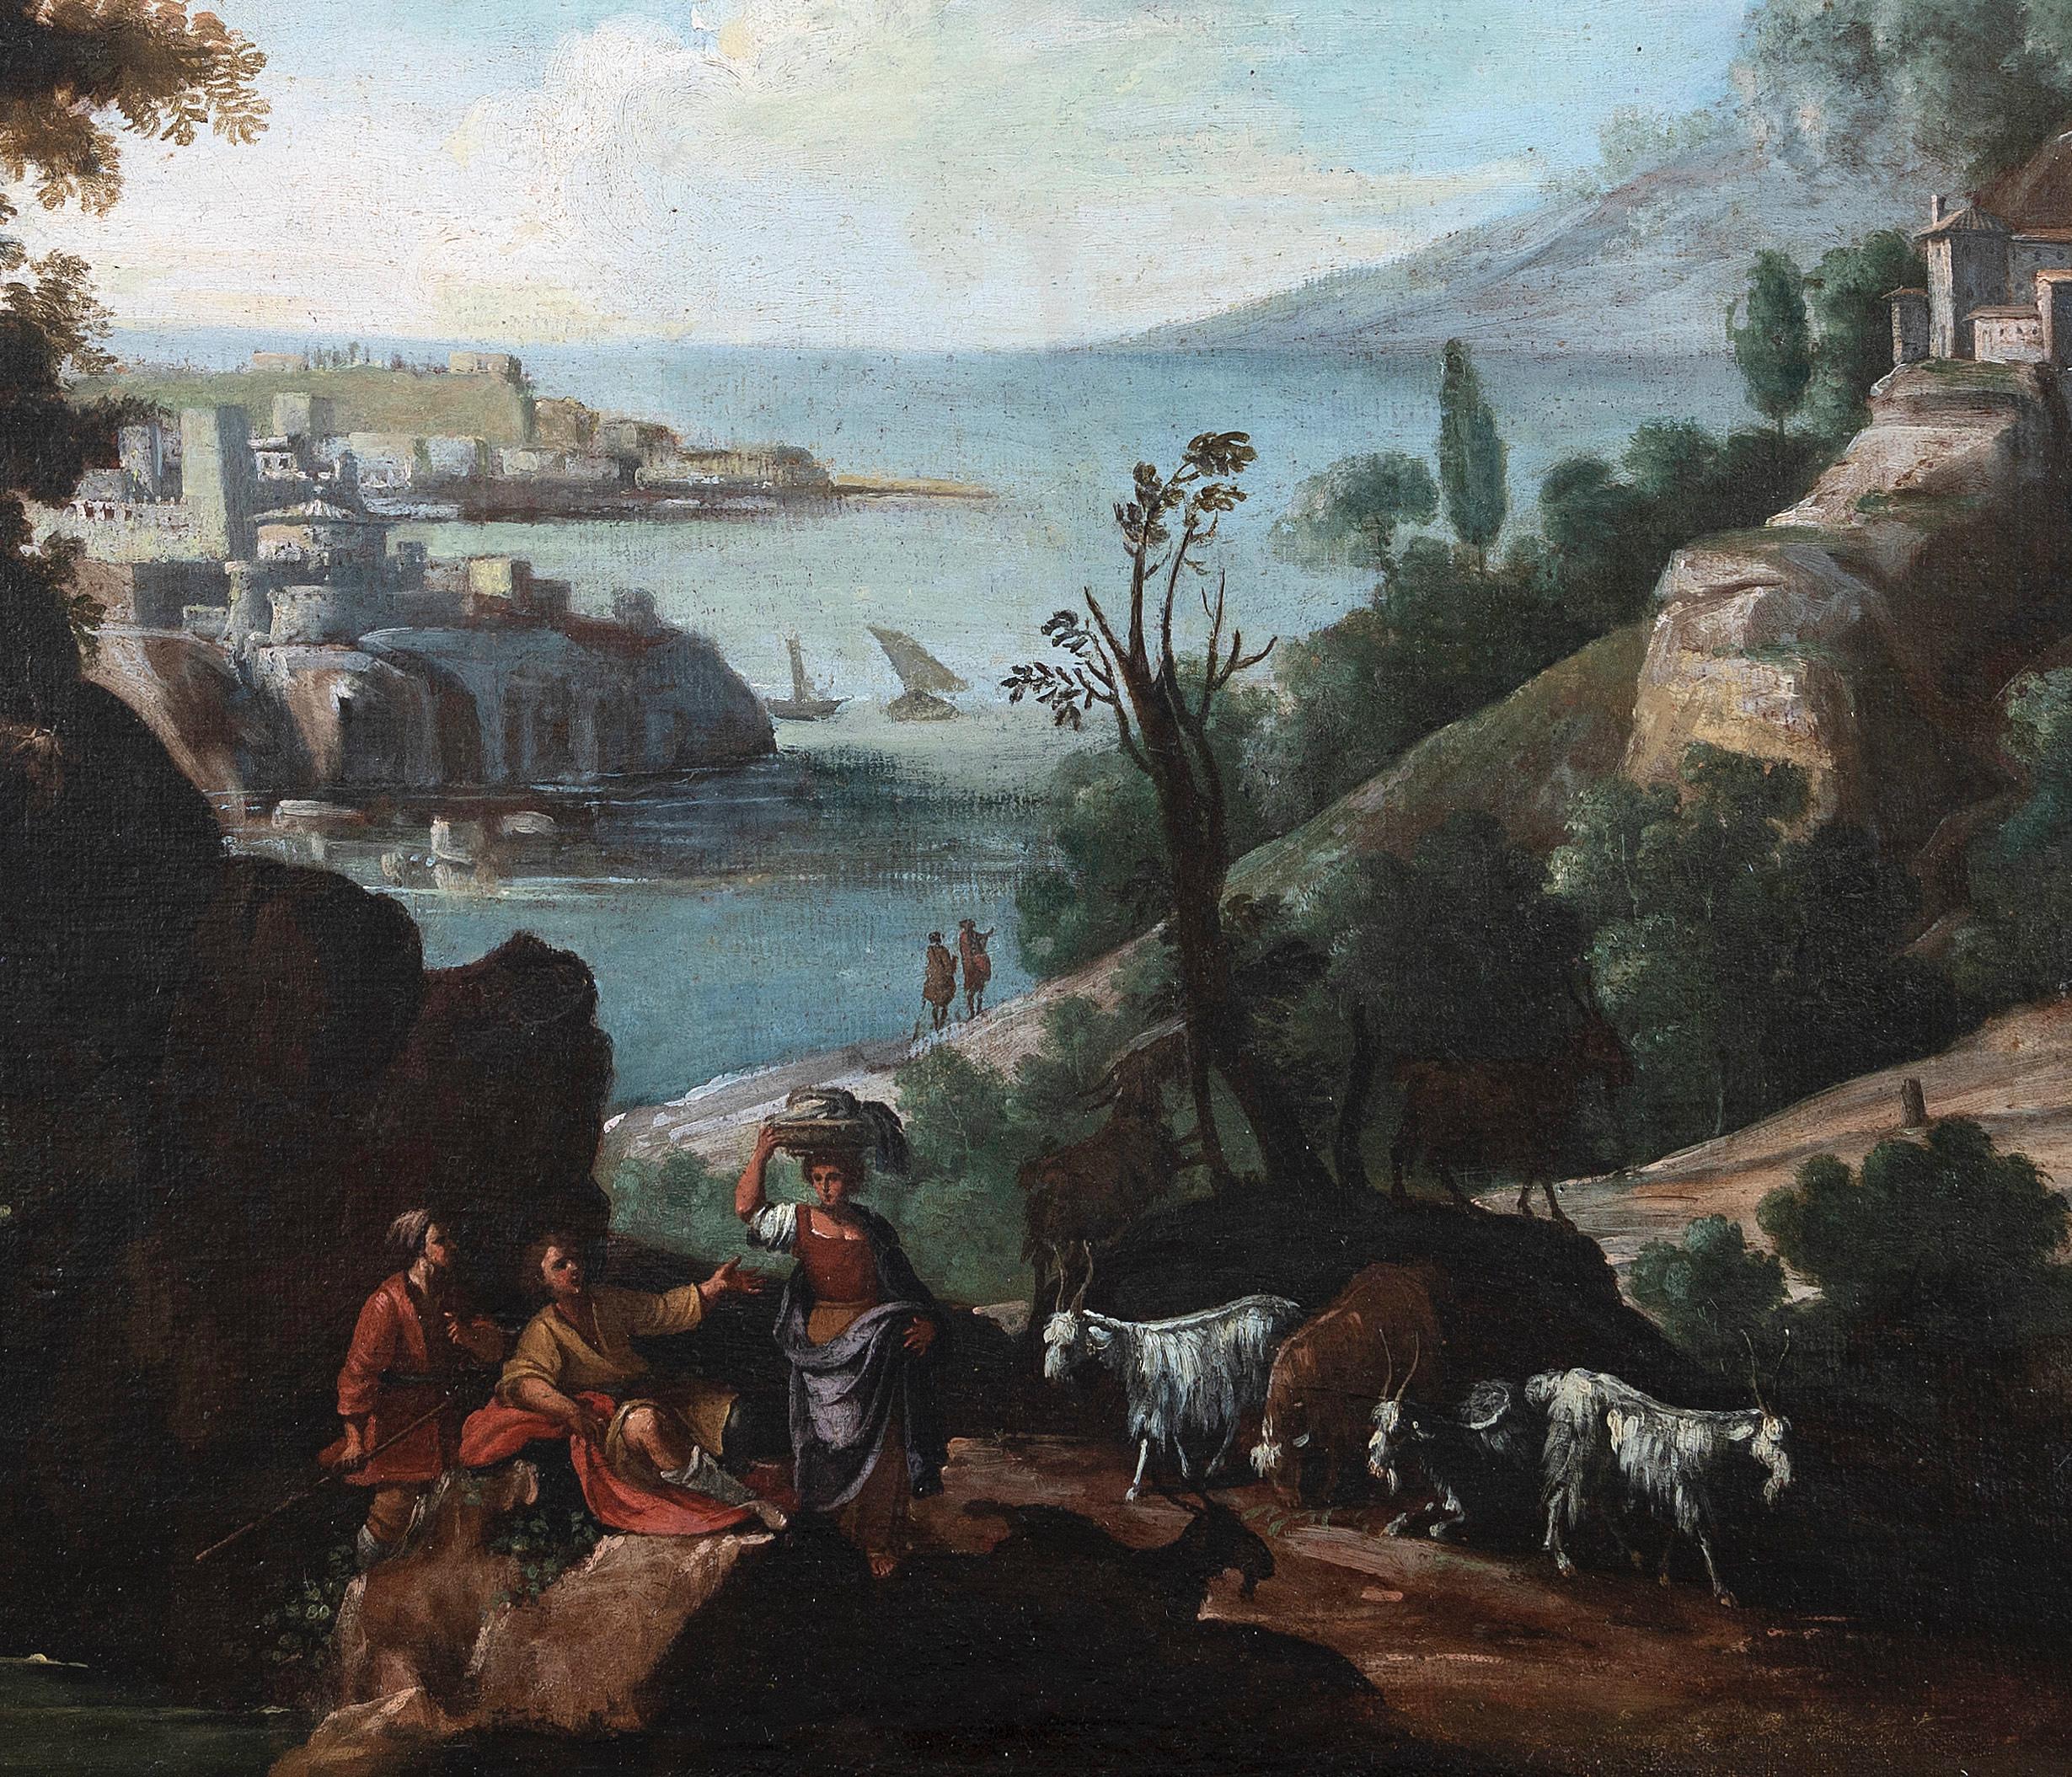 Landscape with Figures and Herd - Original Oil On Canvas - 18th Century - Painting by Unknown